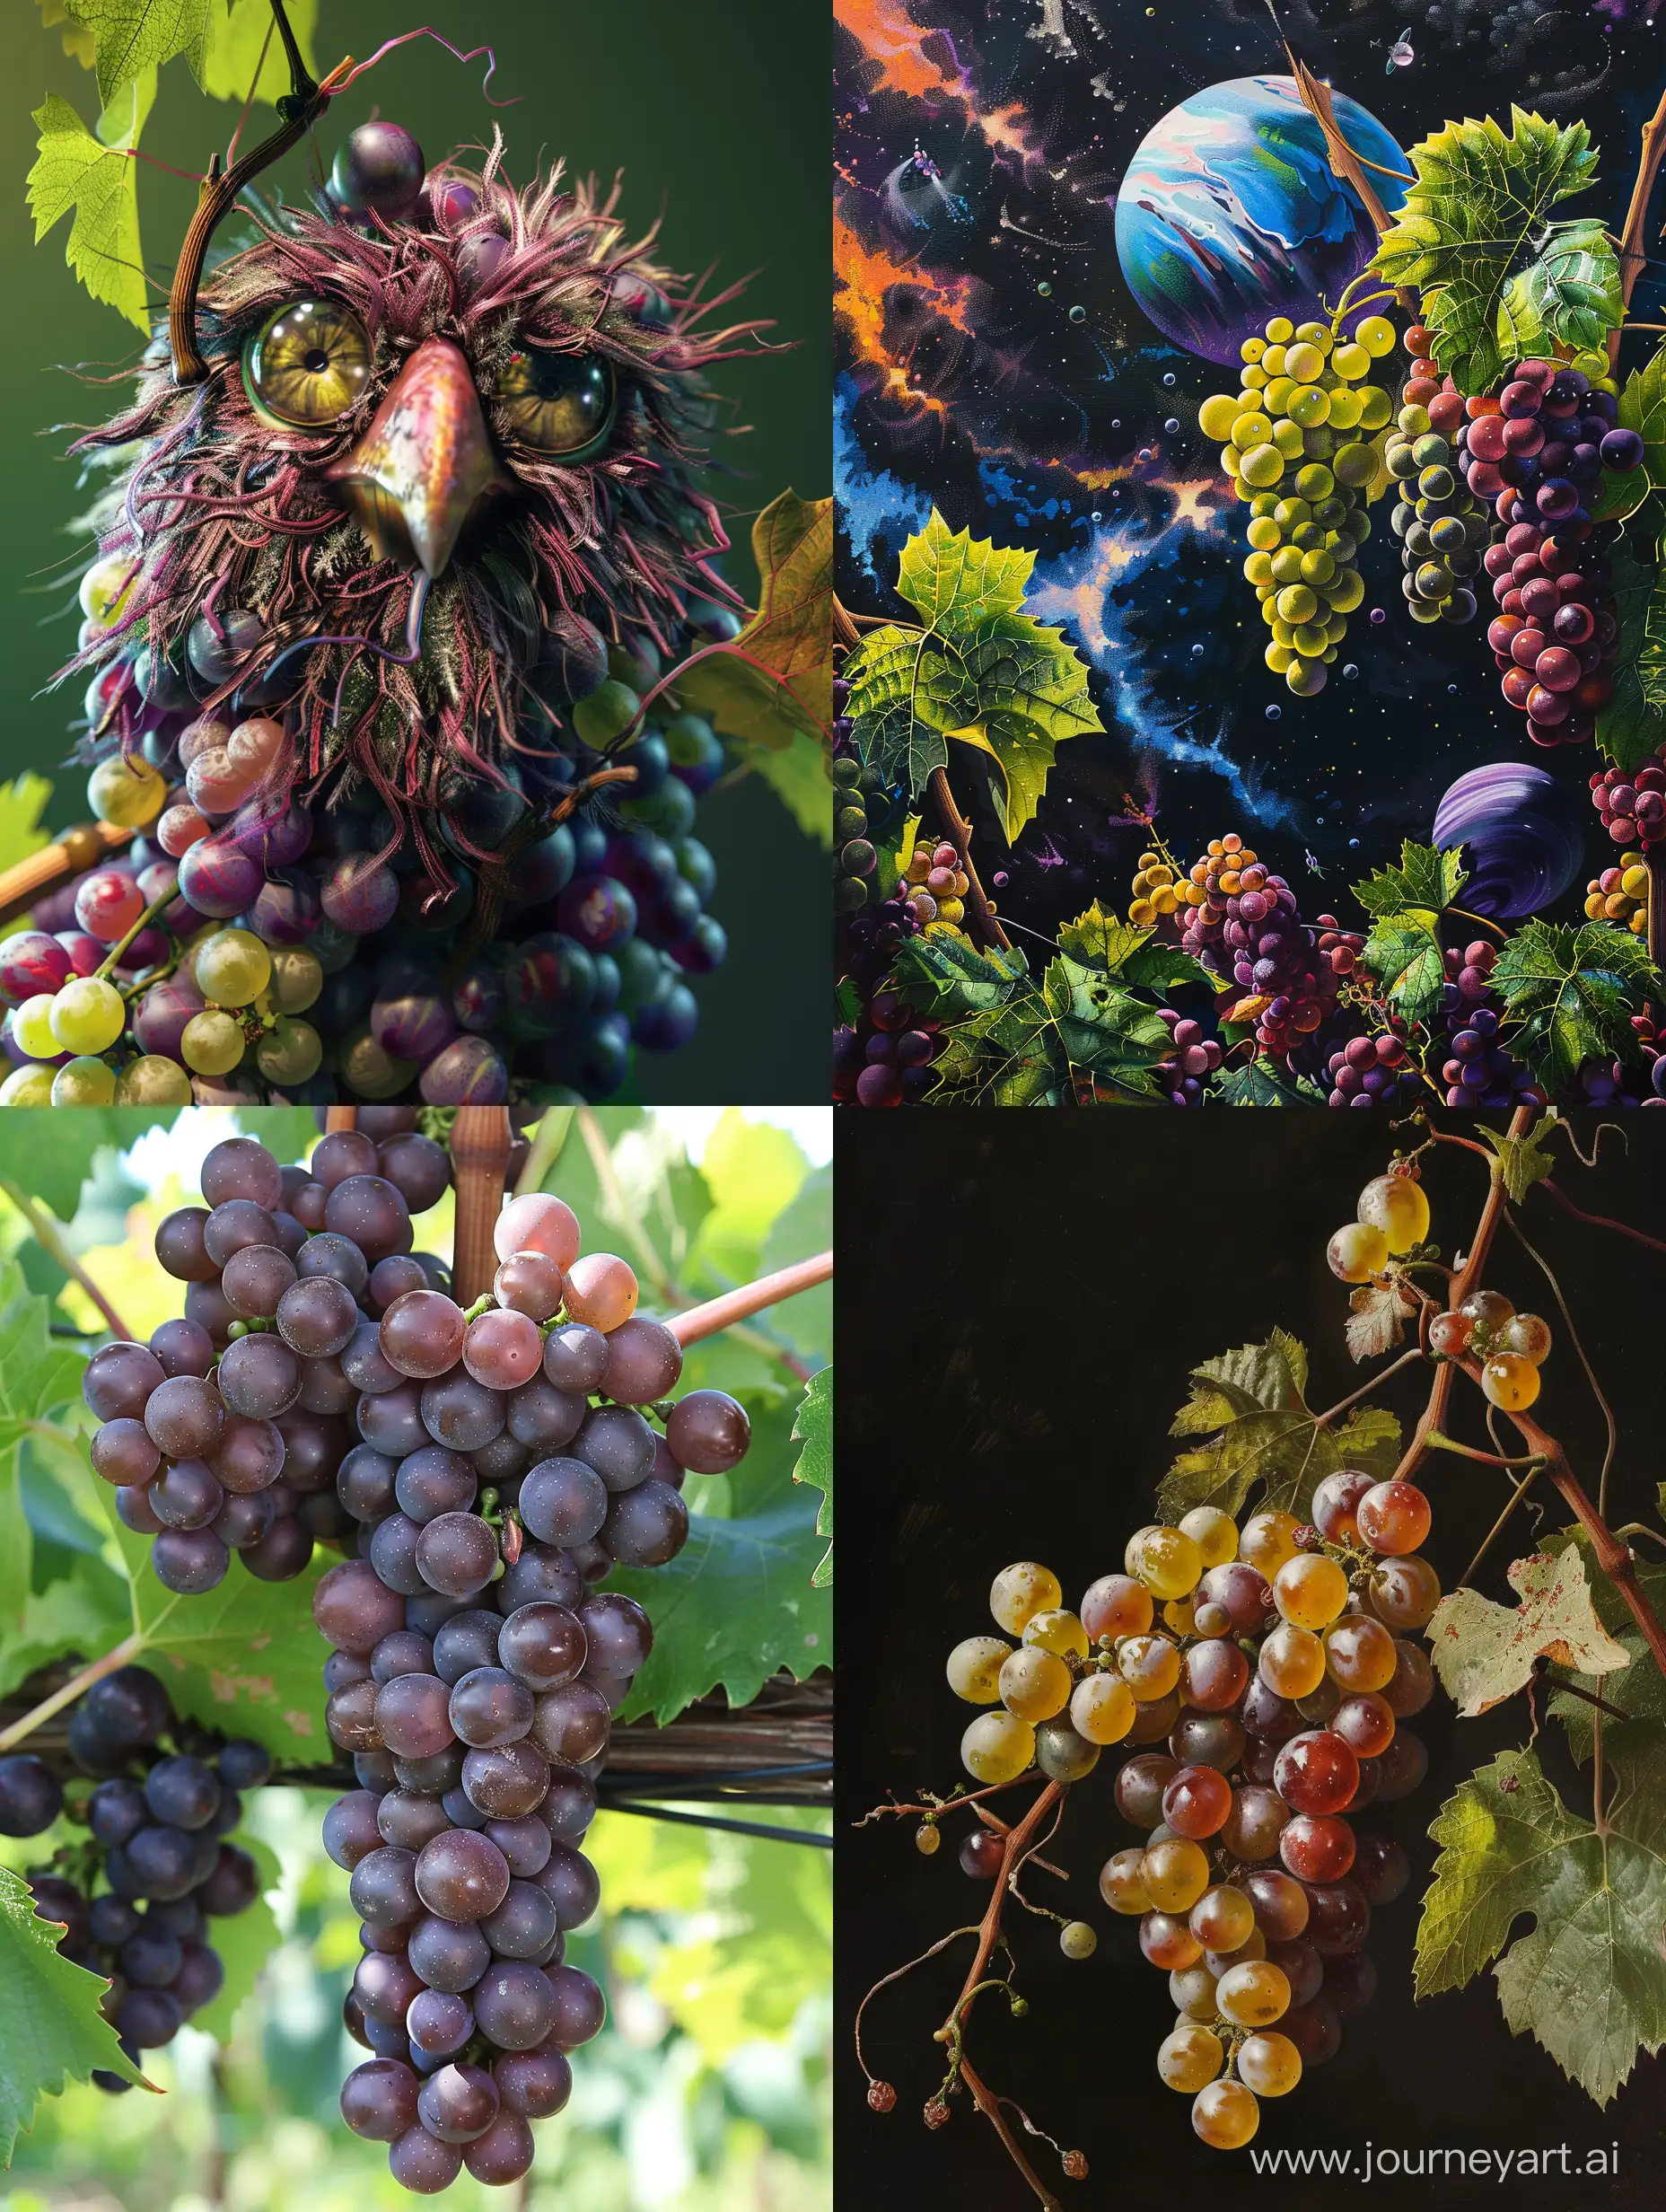 Extraterrestrial-Grape-Harvest-on-a-Colorful-Alien-Planet